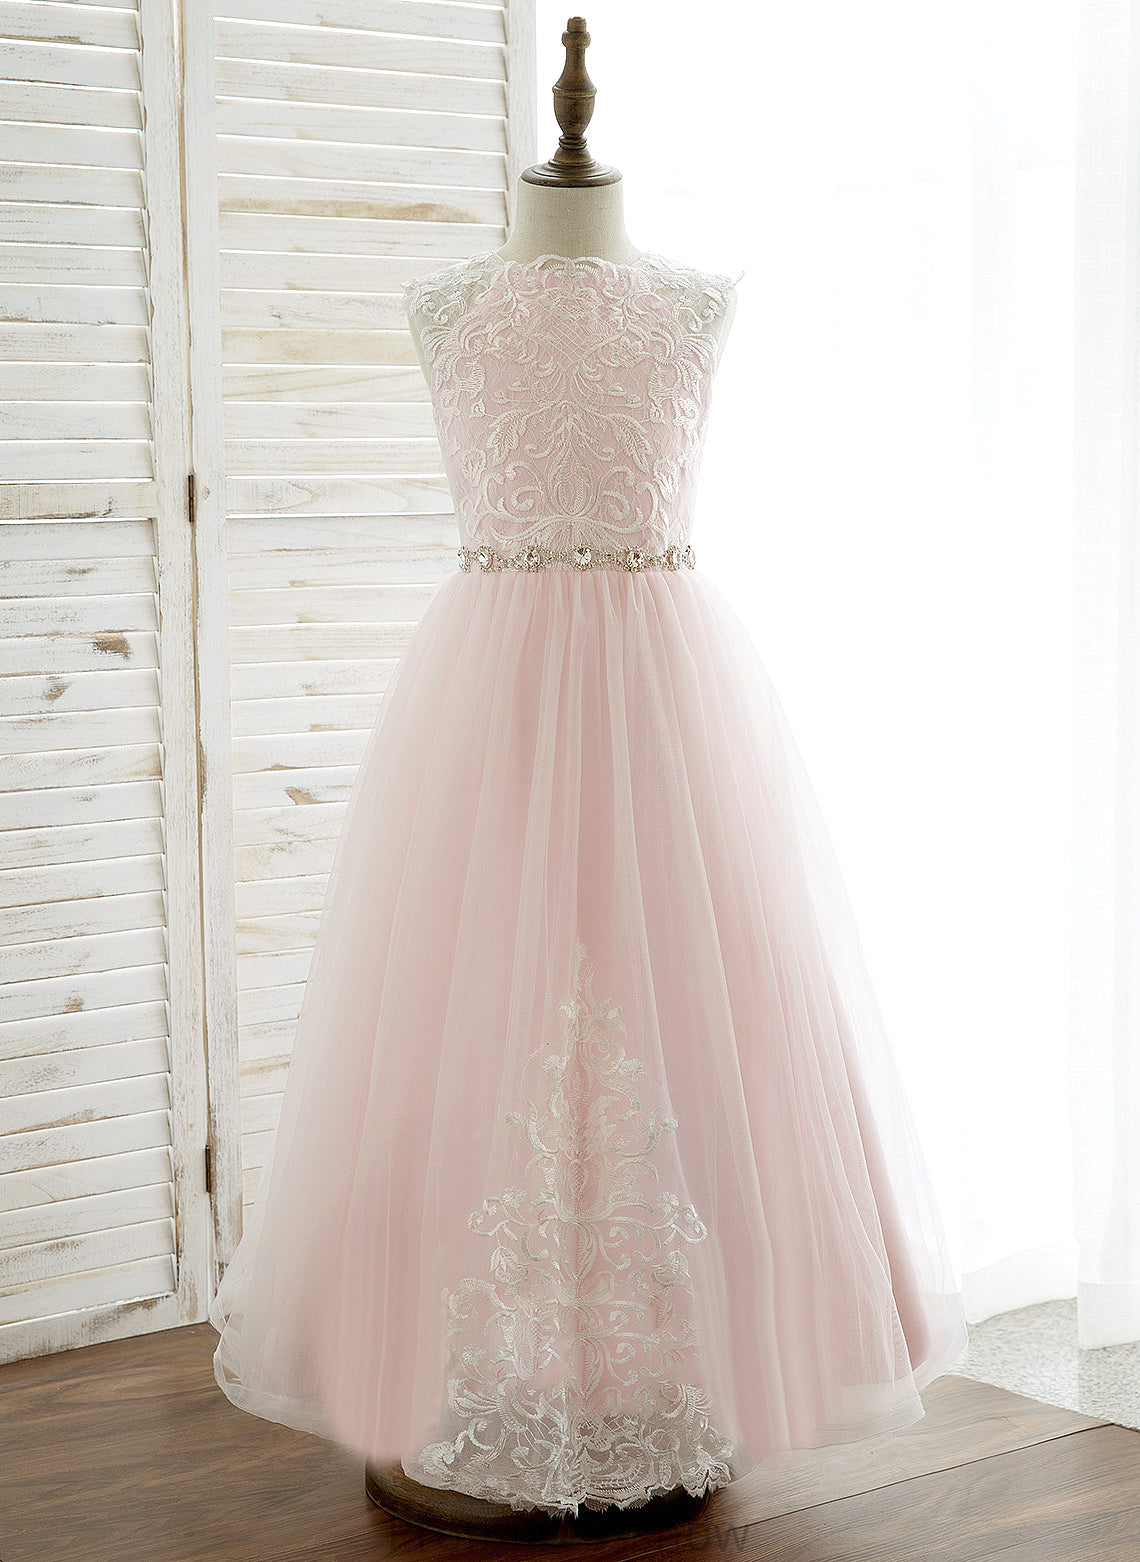 Sleeveless Ankle-length Girl Flower - Lexie A-Line/Princess Dress Scoop With Tulle/Lace Flower Girl Dresses Neck Rhinestone